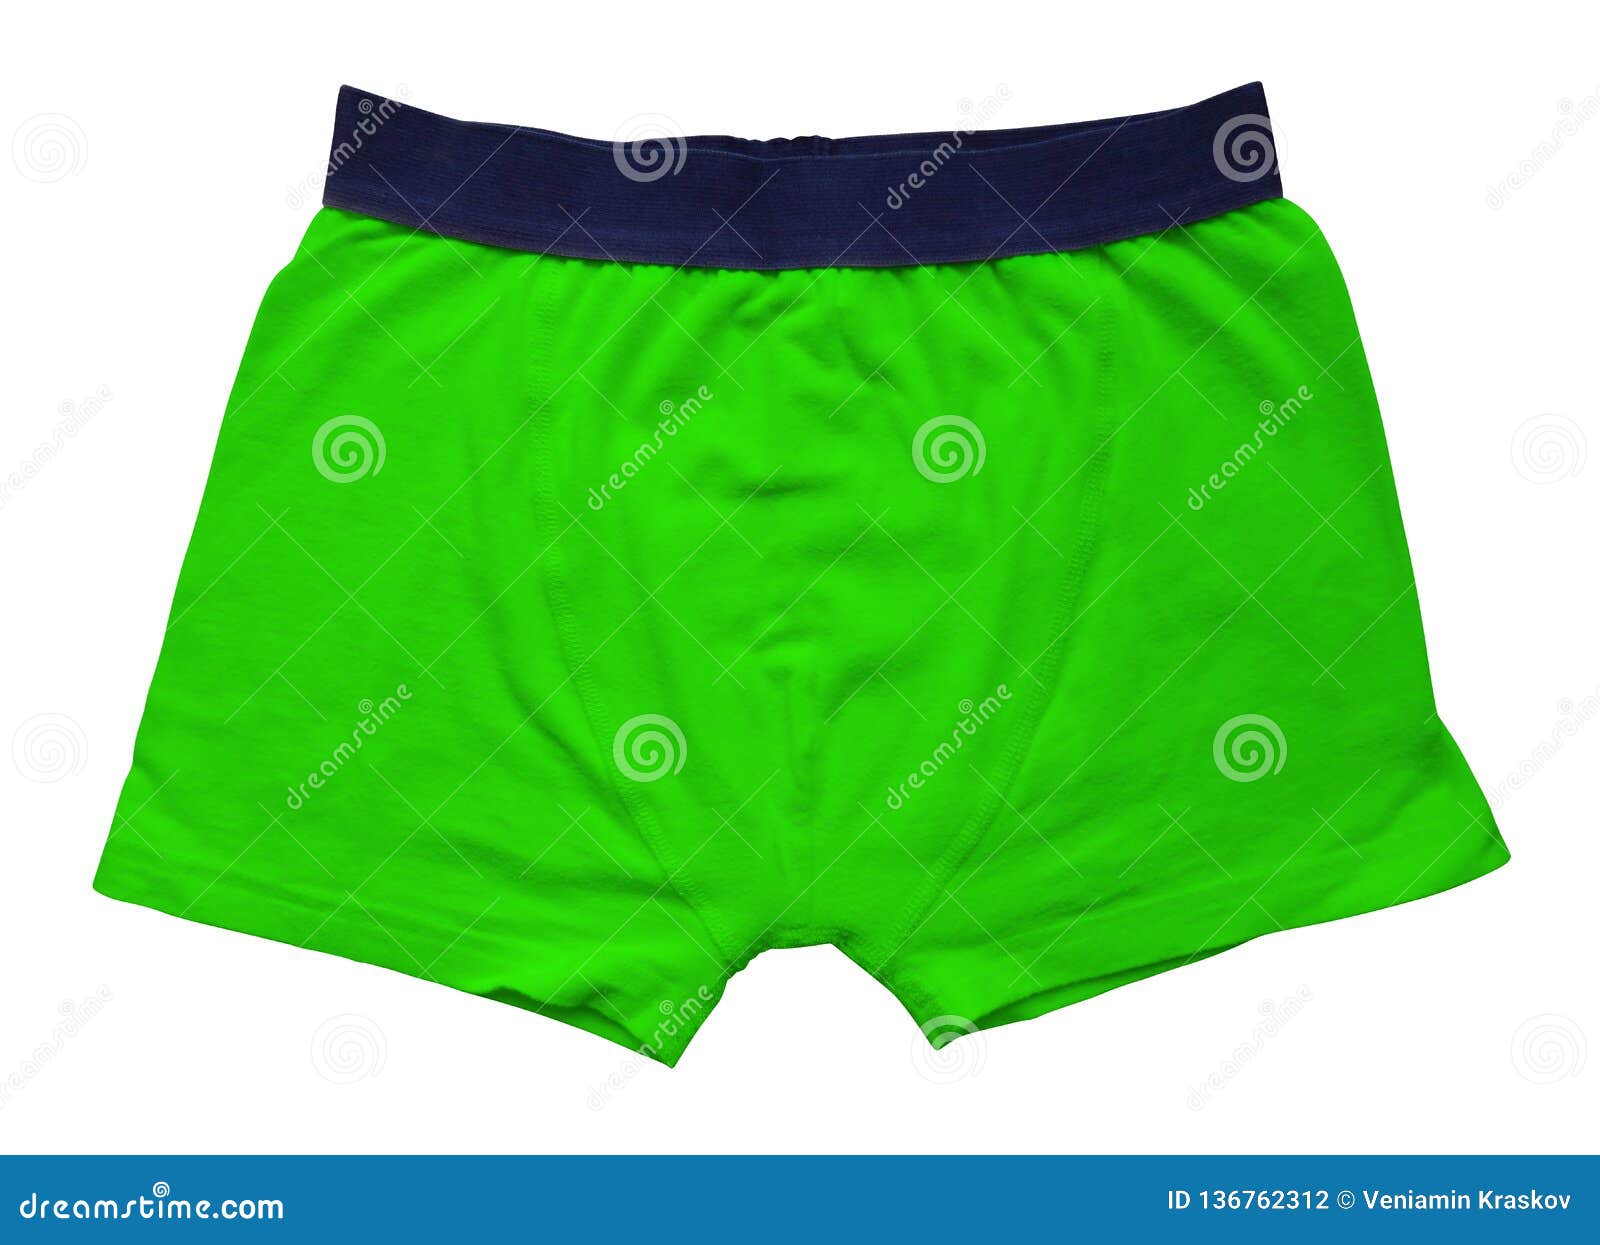 Male Underwear Isolated - Green Stock Photo - Image of white, wear ...